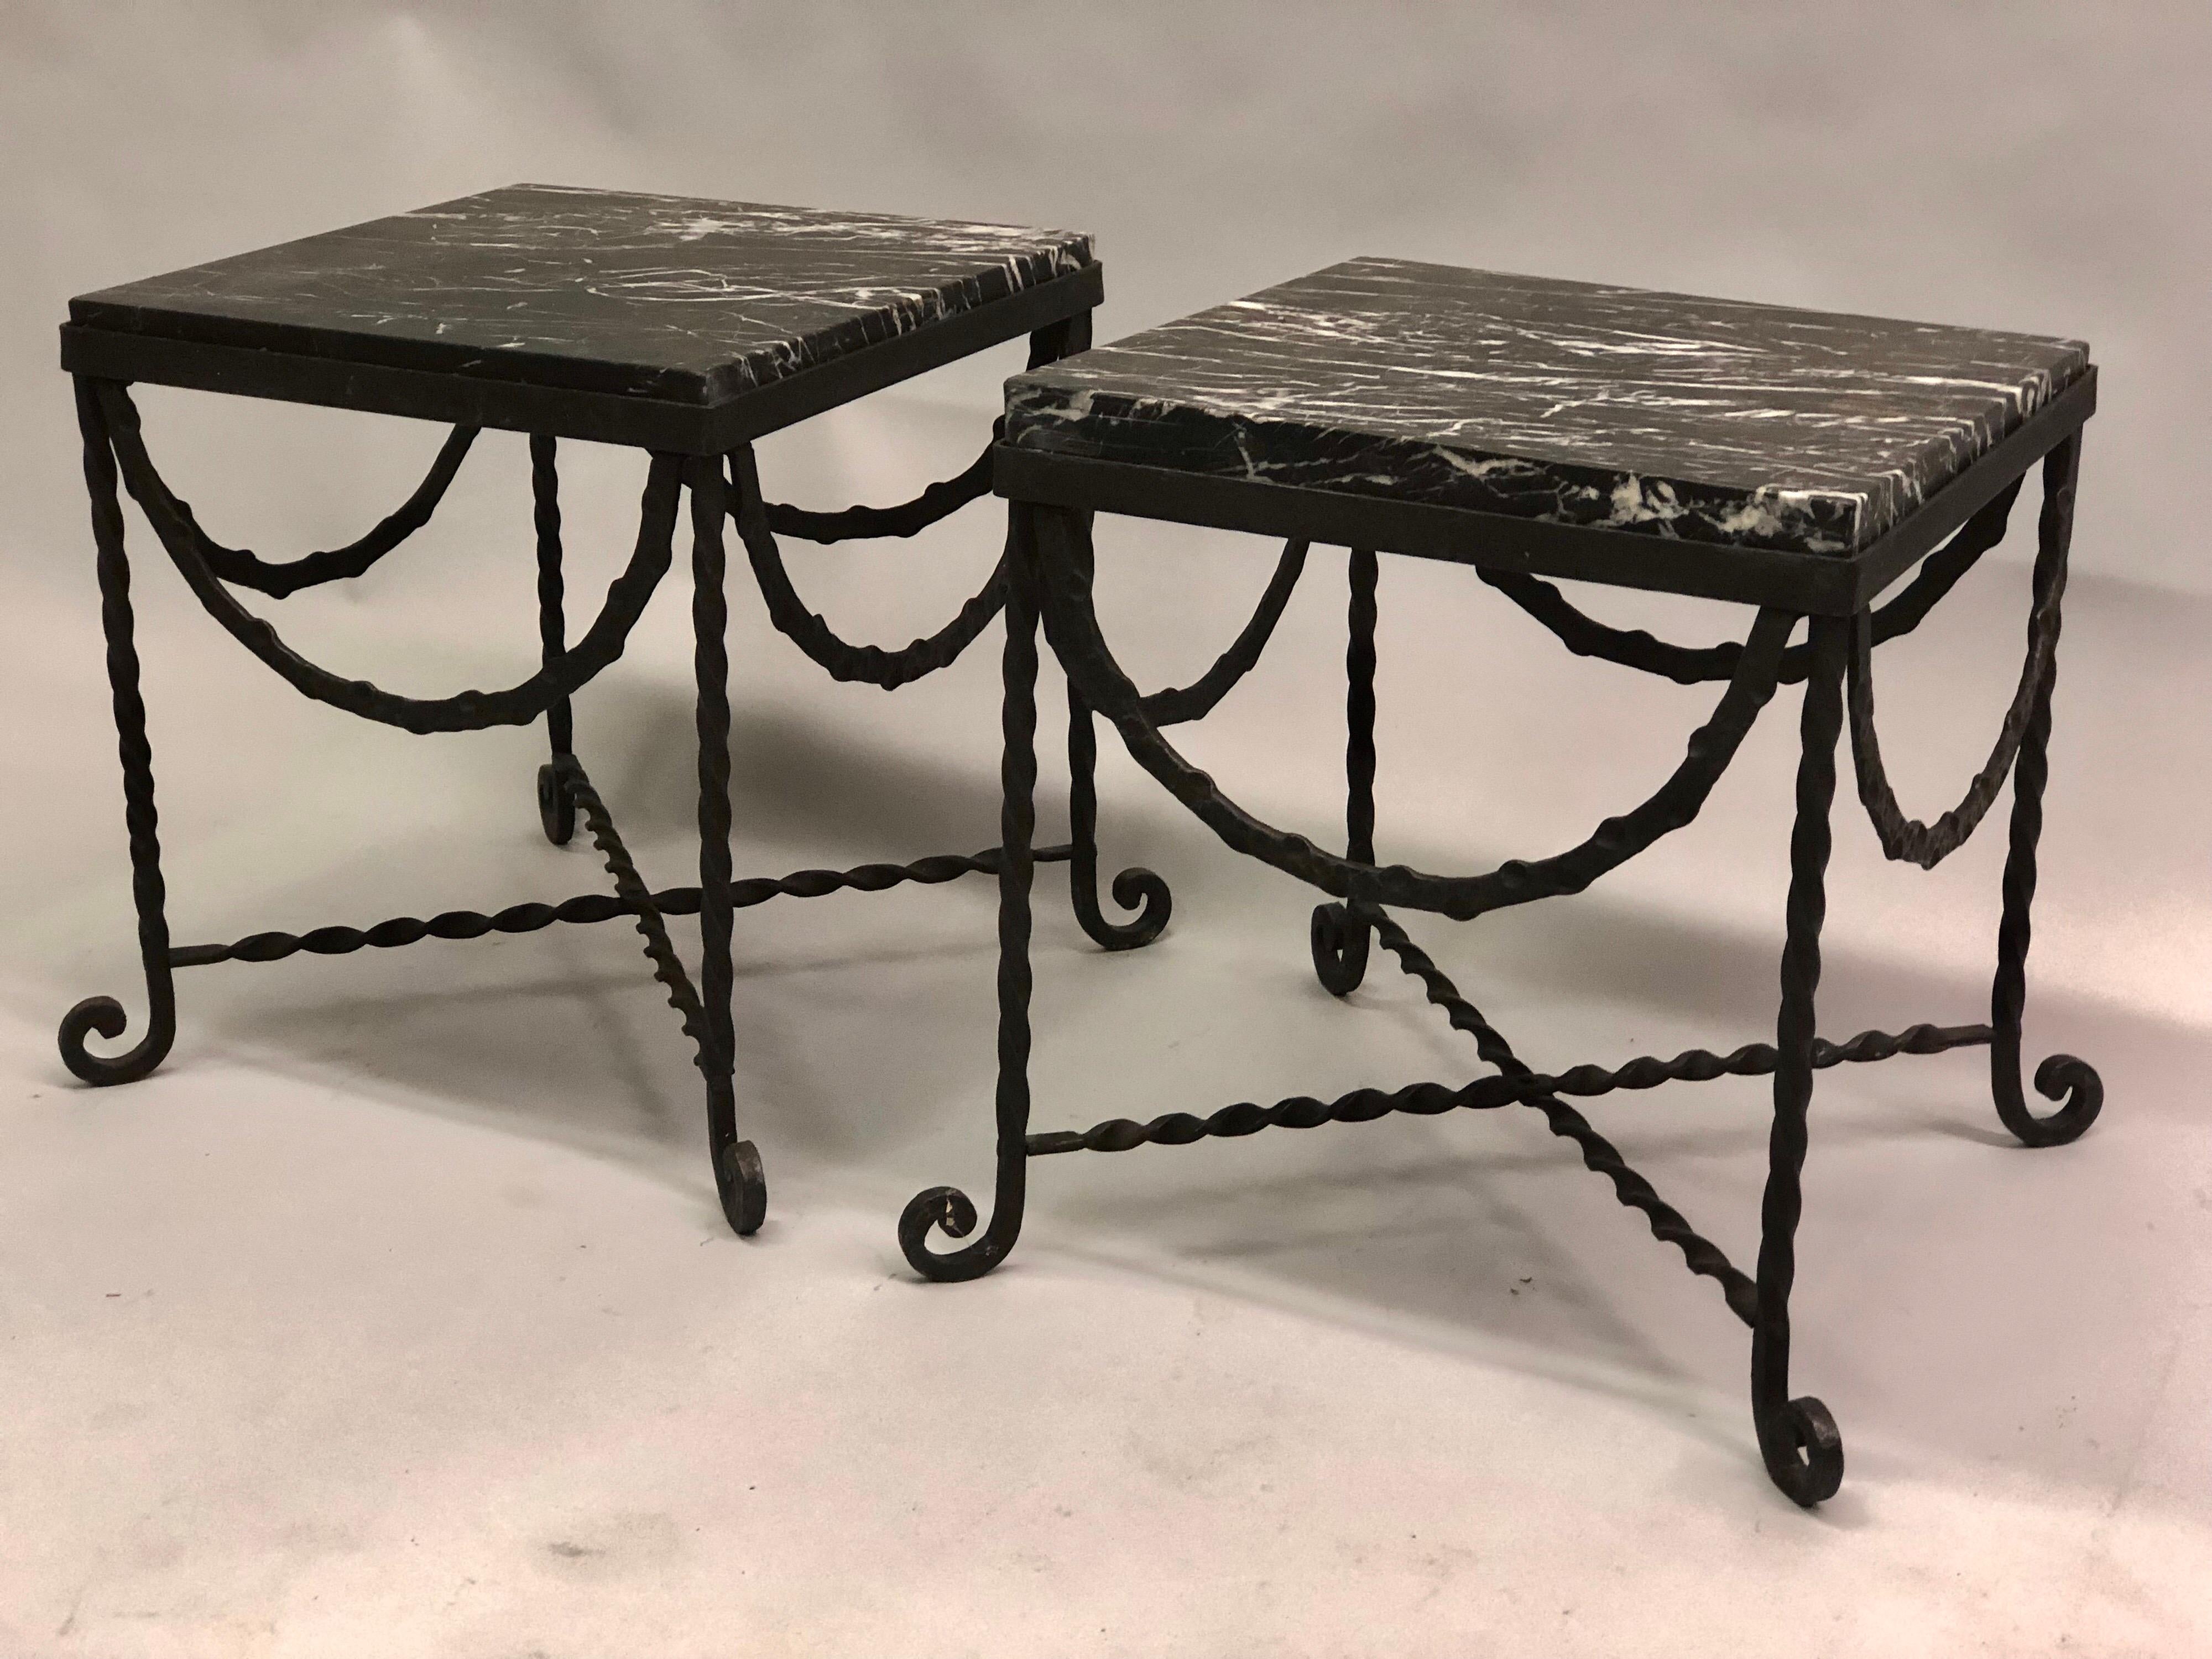 Pair of French midcentury / Art Deco wrought iron and black marble side or end tables attributed to Edgar Brandt, circa 1925-1930. The pieces can also be used together to form a coffee table.

The tables are hand hammered in iron using a twist